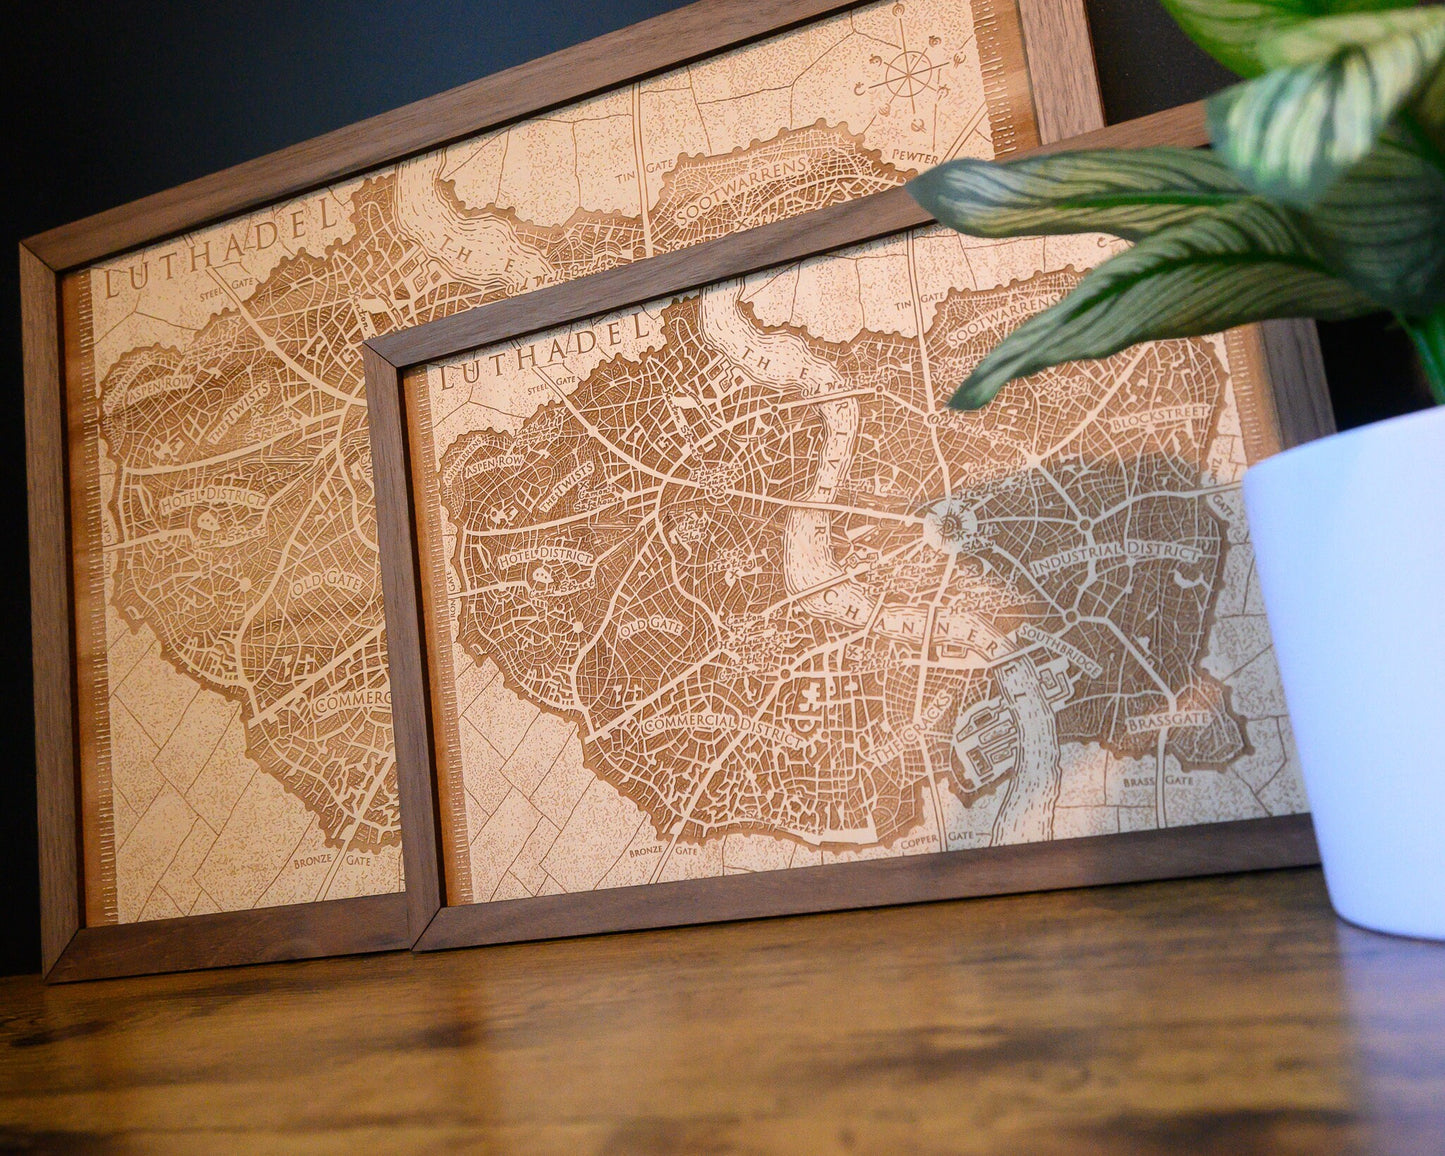 Luthadel Map, Wood Engraved Map from Mistborn, Cosmere